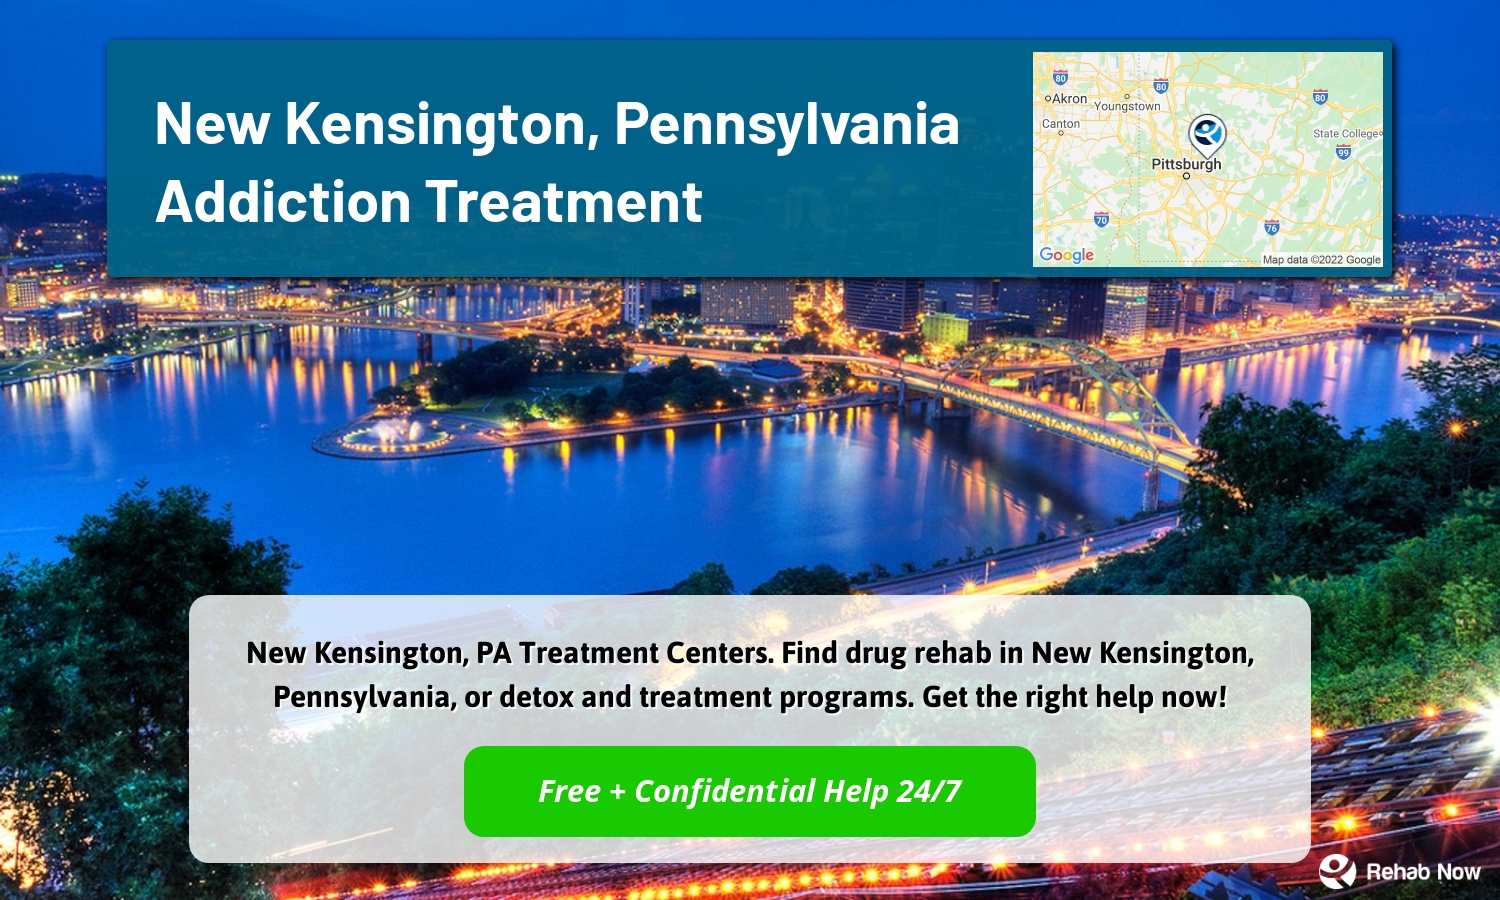 New Kensington, PA Treatment Centers. Find drug rehab in New Kensington, Pennsylvania, or detox and treatment programs. Get the right help now!